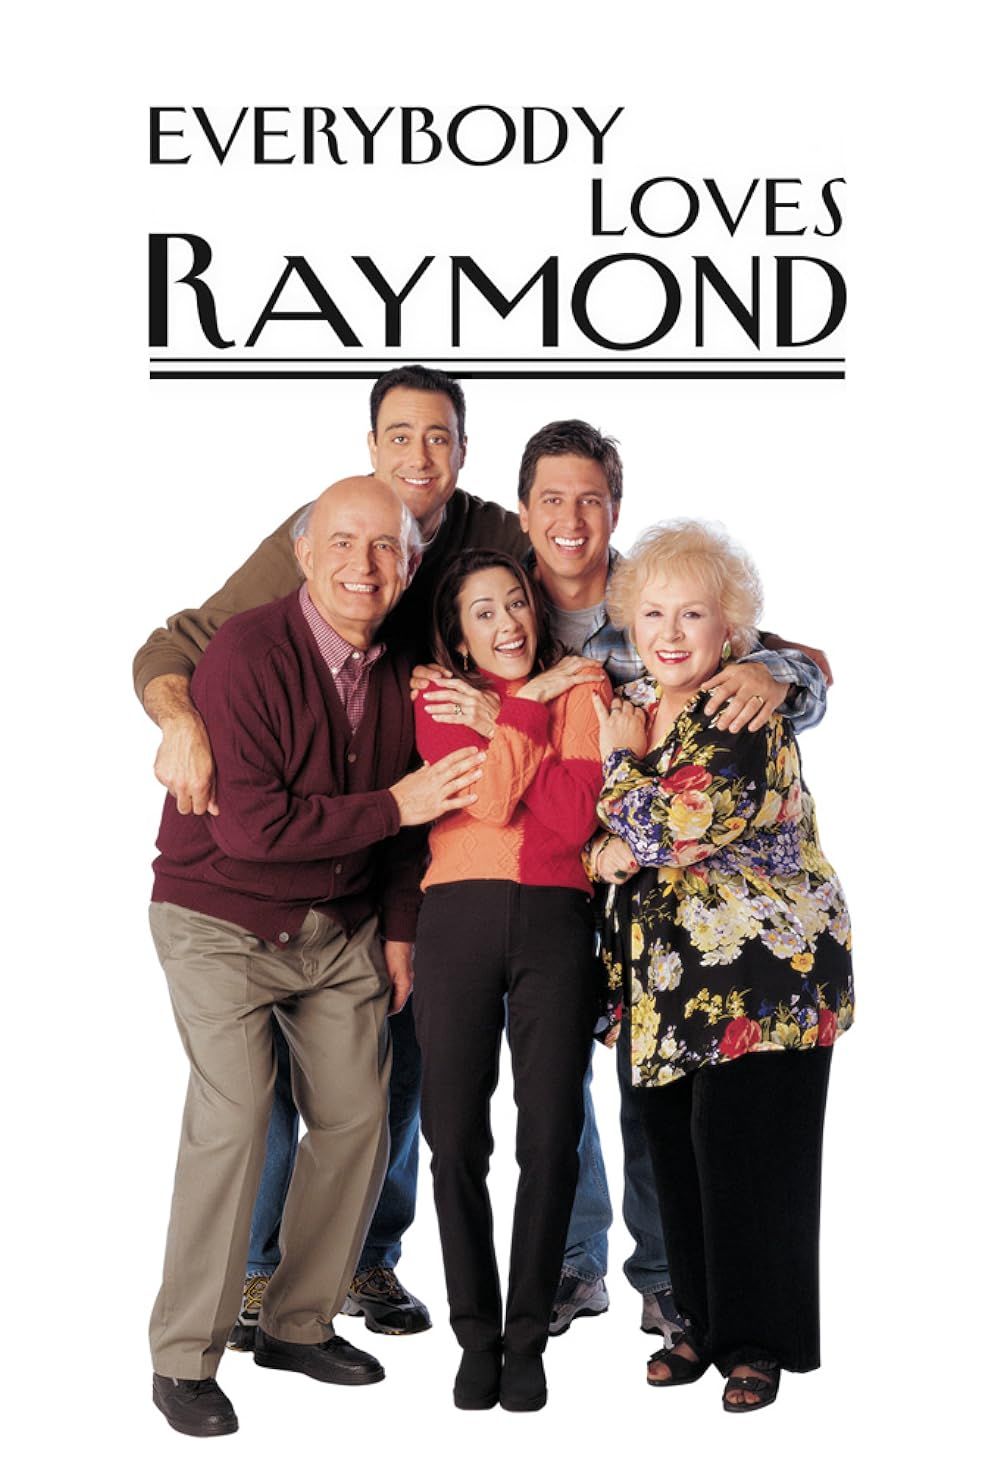 Everybody Loves Raymond Revival Chances Addressed by Ray Romano